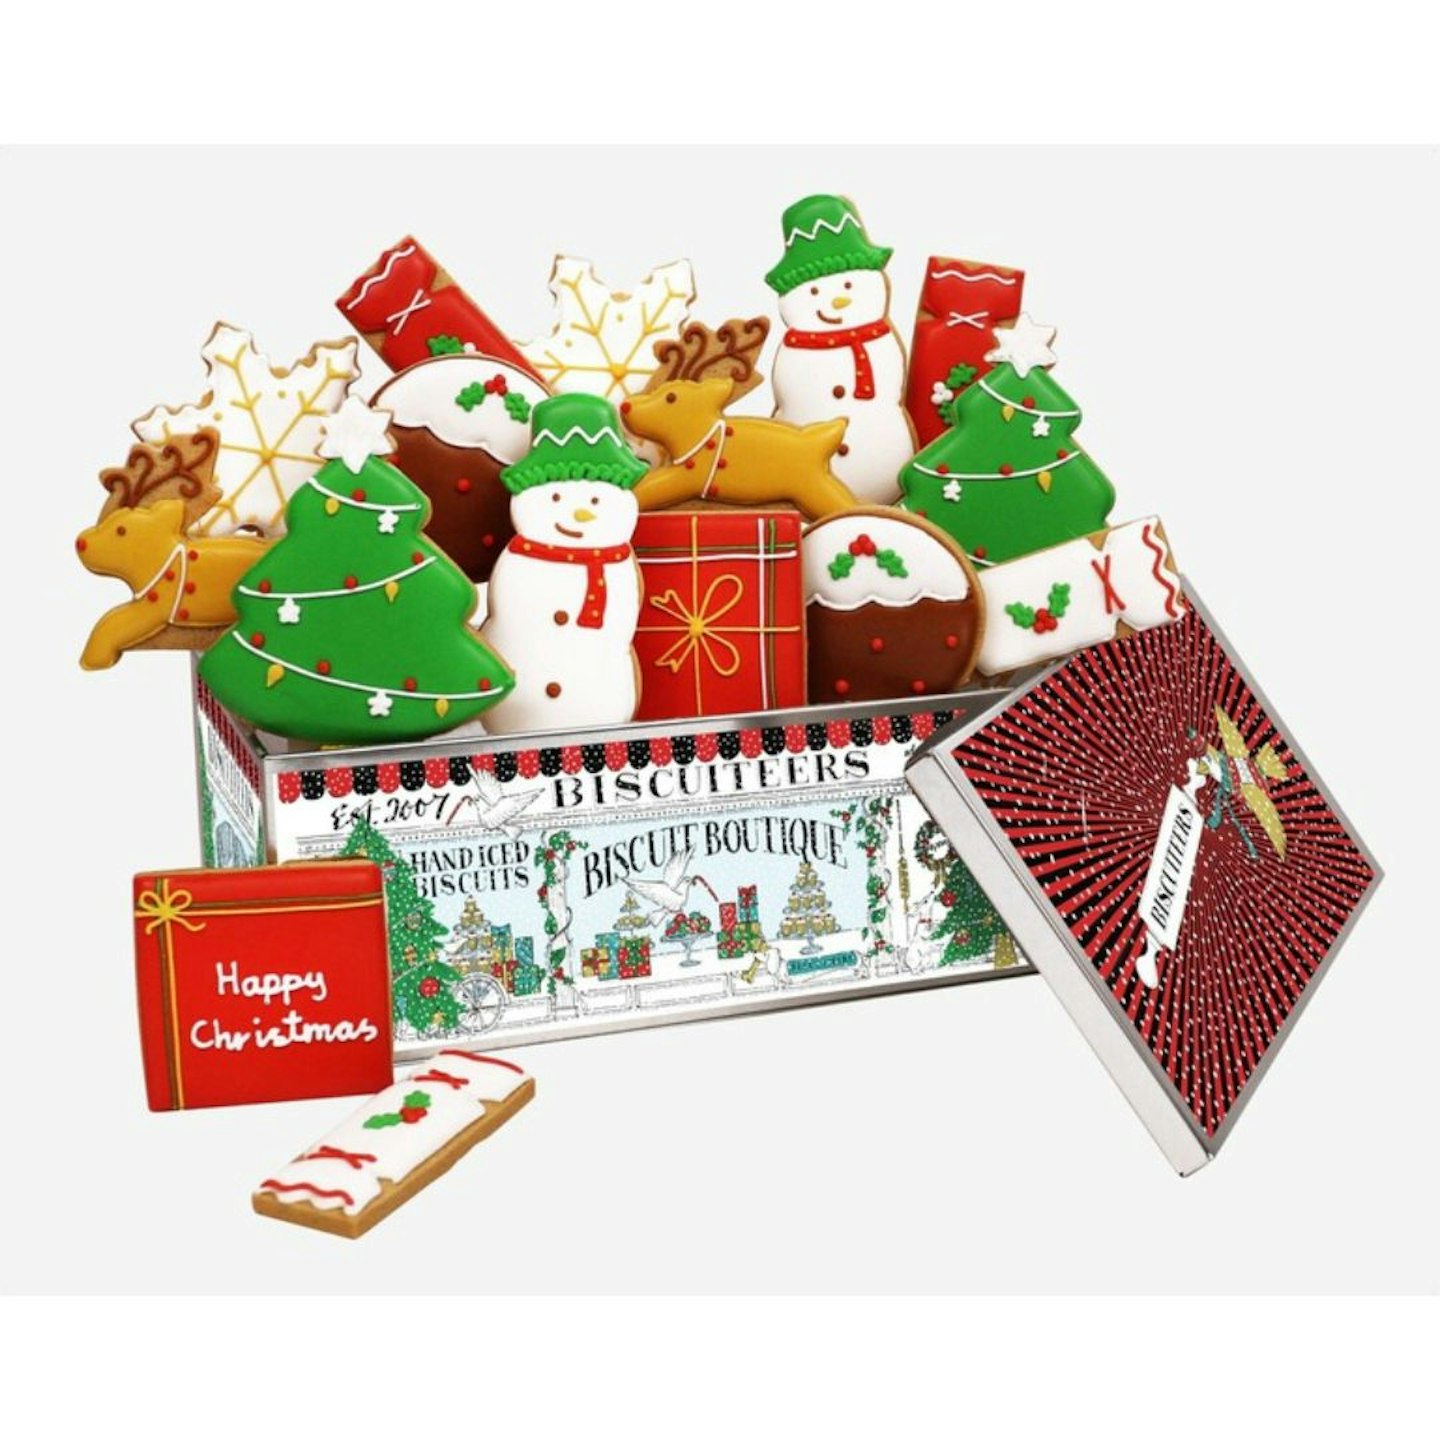 Best Christmas Gifts For Teachers:  Gingerbread Happy Christmas Luxe